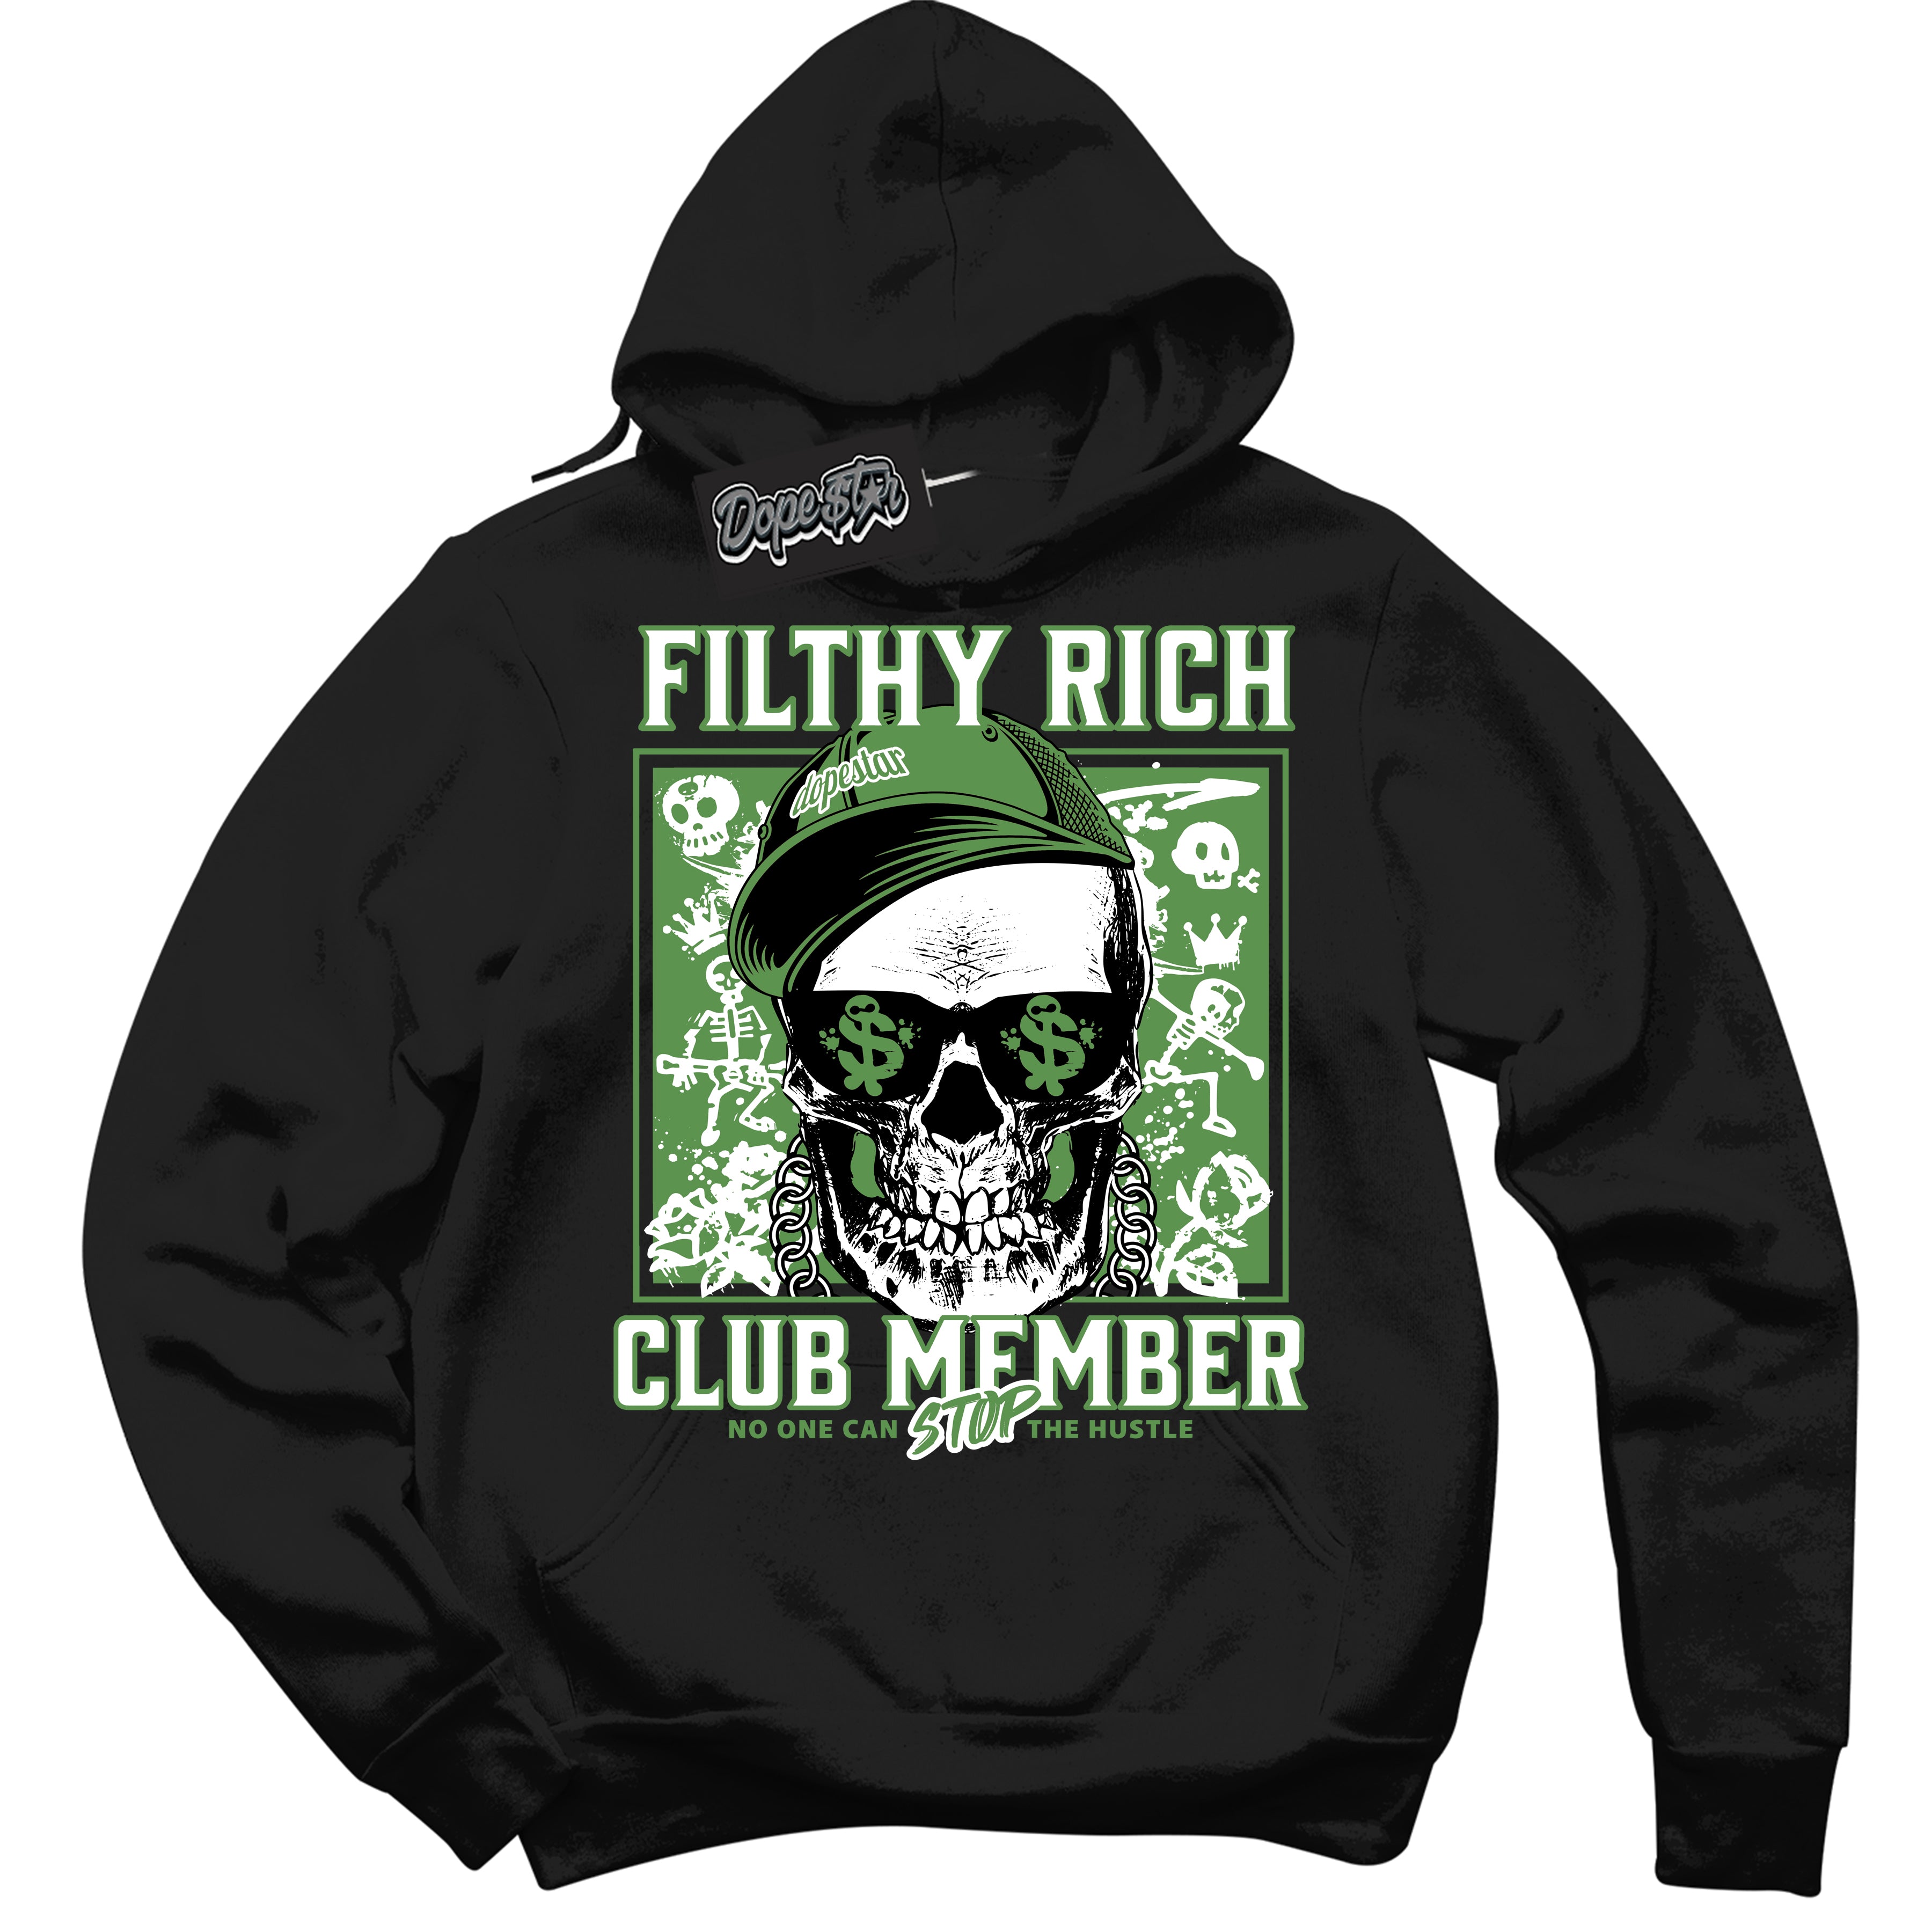 Cool Black Hoodie with “ Filthy Rich ”  design that Perfectly Matches Chlorophyll 1s Sneakers.